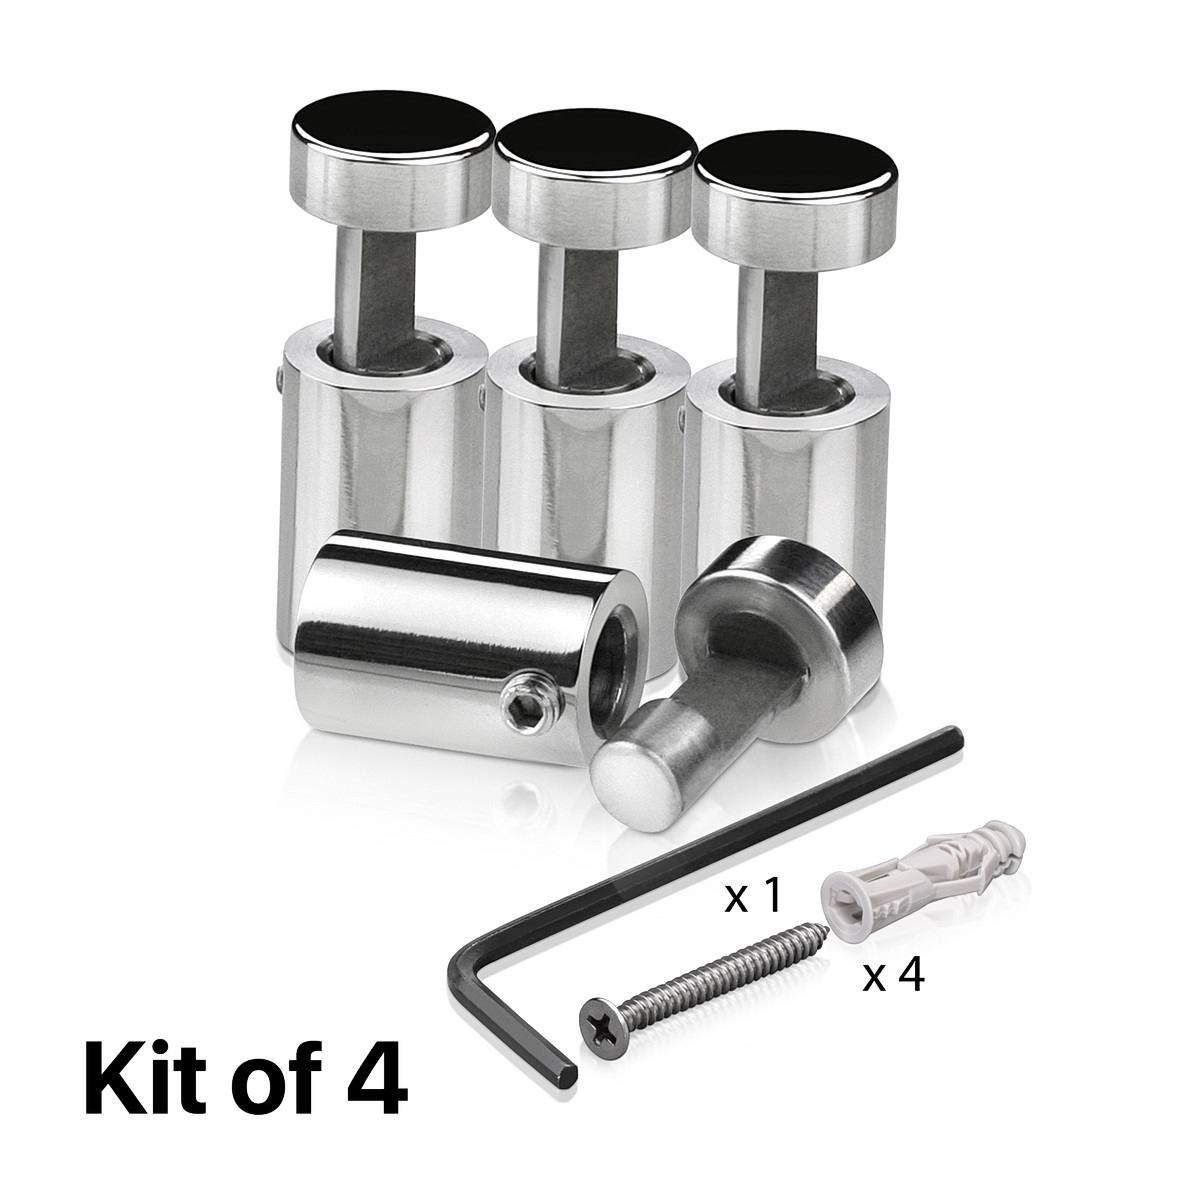 (Set of 4) 1/2'' Diameter X 3/4'' Barrel Length, Stainless Steel Polished Finish. Adjustable Edge Grip Standoff with (4) 2208Z Screw and (4) LANC1 Anchor  for concrete/drywall (For Inside Use Only)